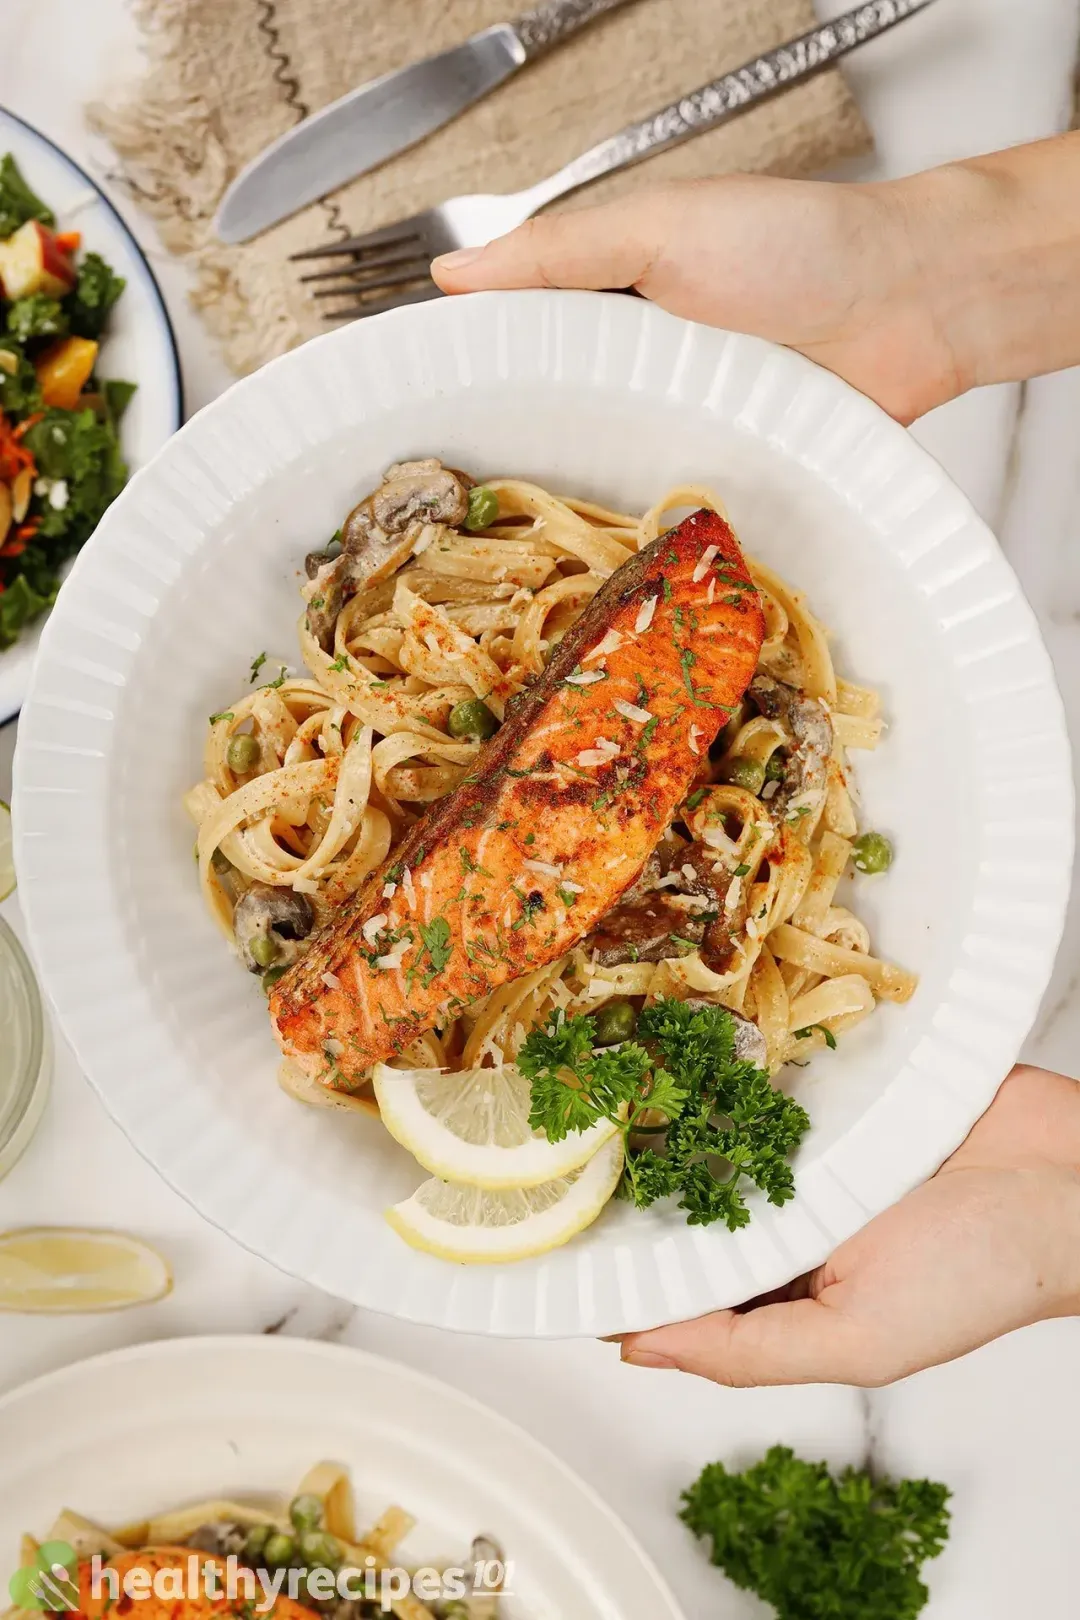 Two hands holding a plate of fettuccine pasta, a bright orange cooked salmon fillet, lemon slices, and fresh parsley